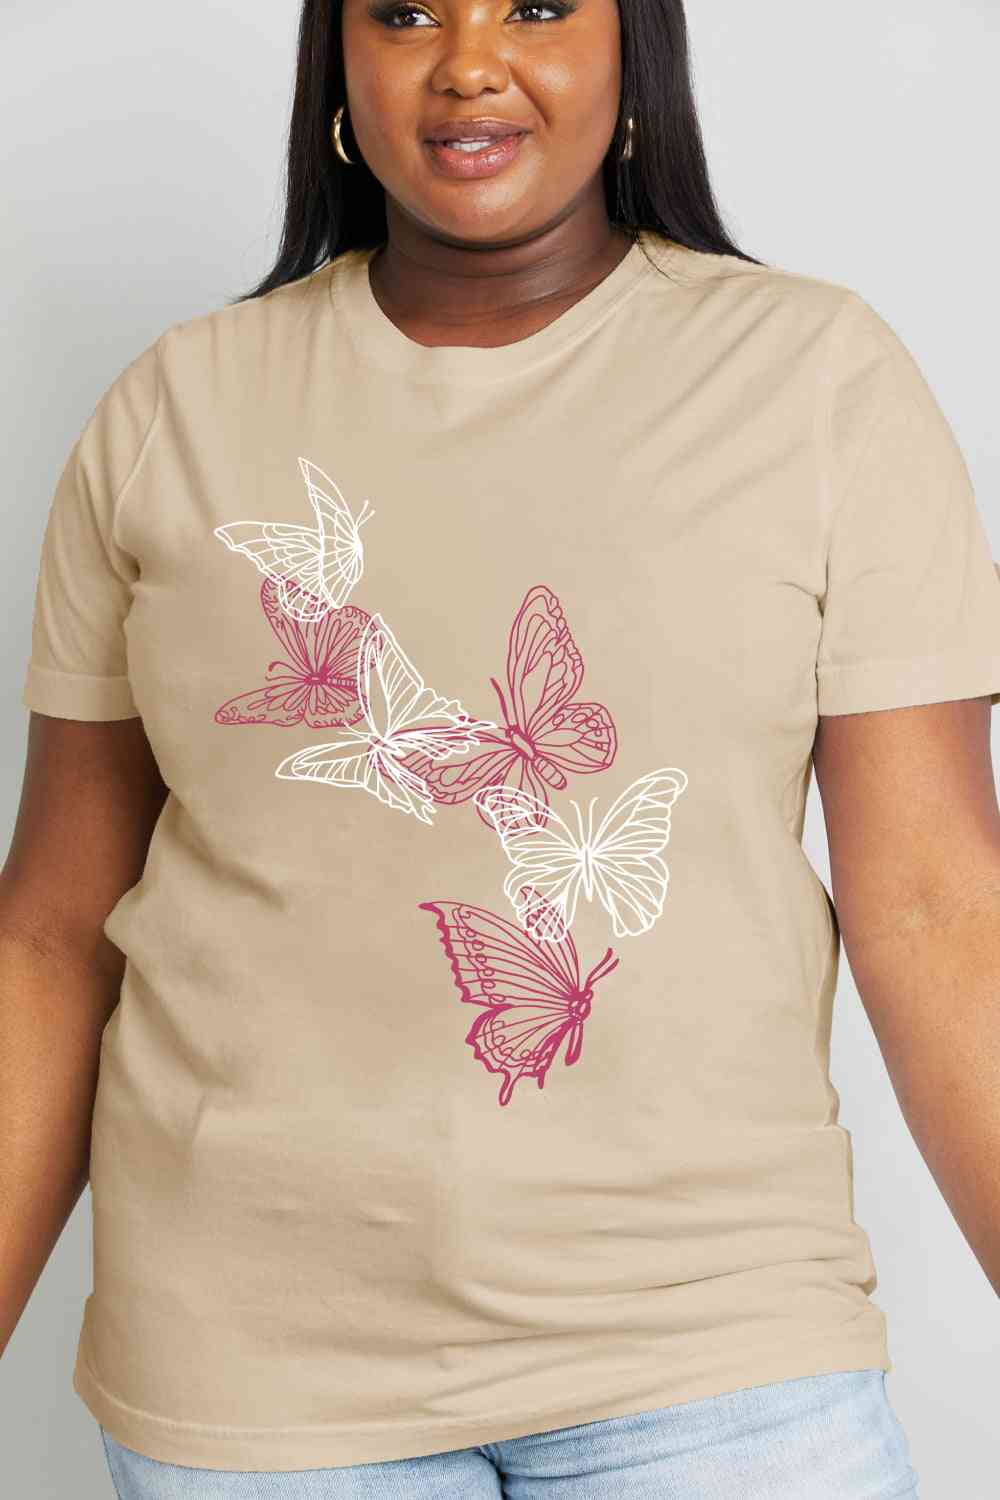 Butterfly Graphic Cotton Tee - Beige / S - T-Shirts - Shirts & Tops - 1 - 2024